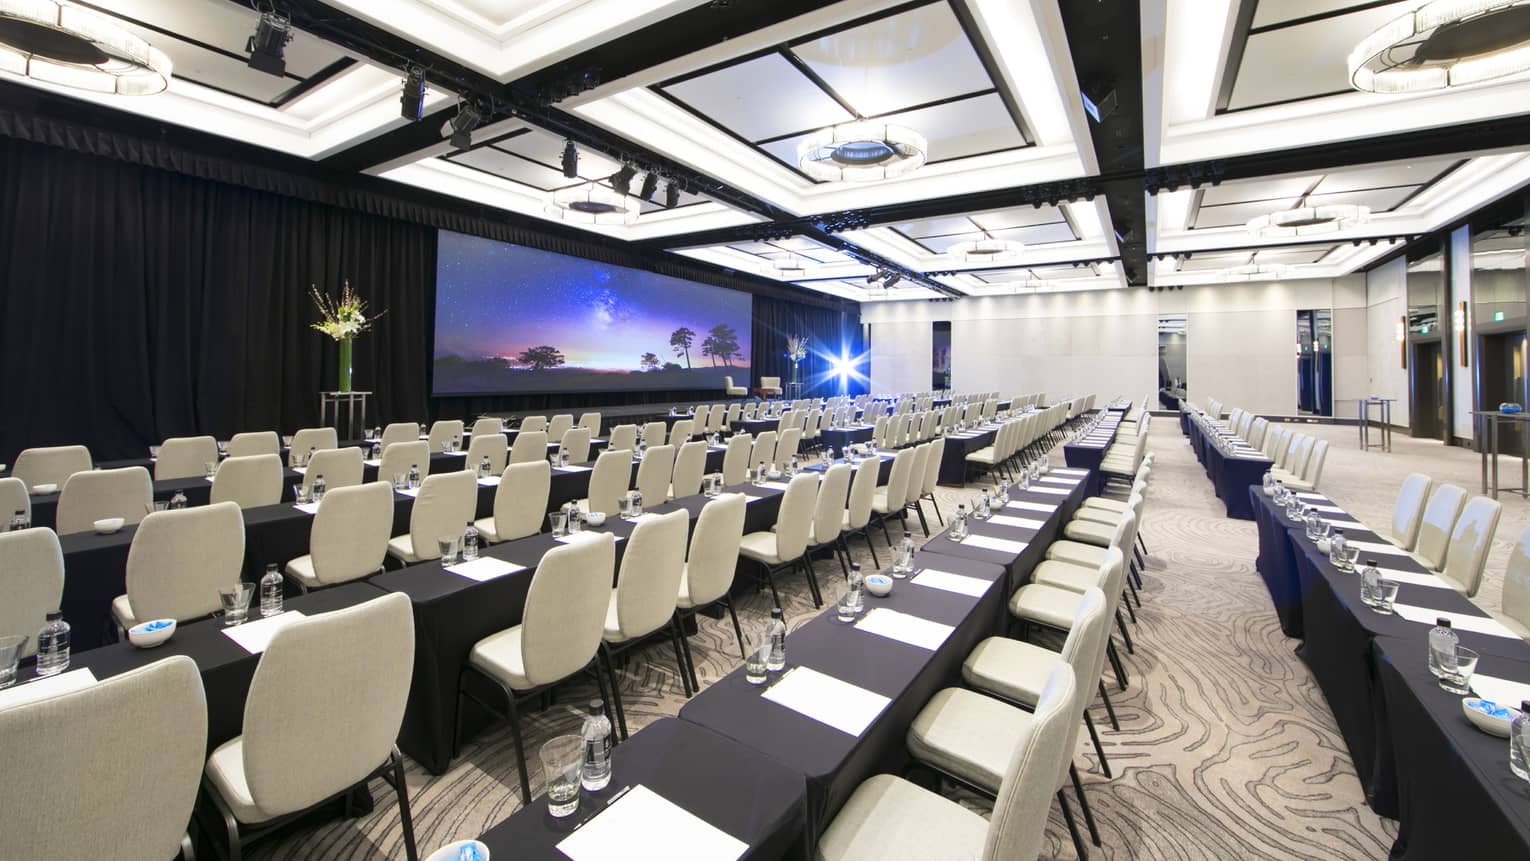 Ballroom meeting space with conference classroom style seating facing a projected screen